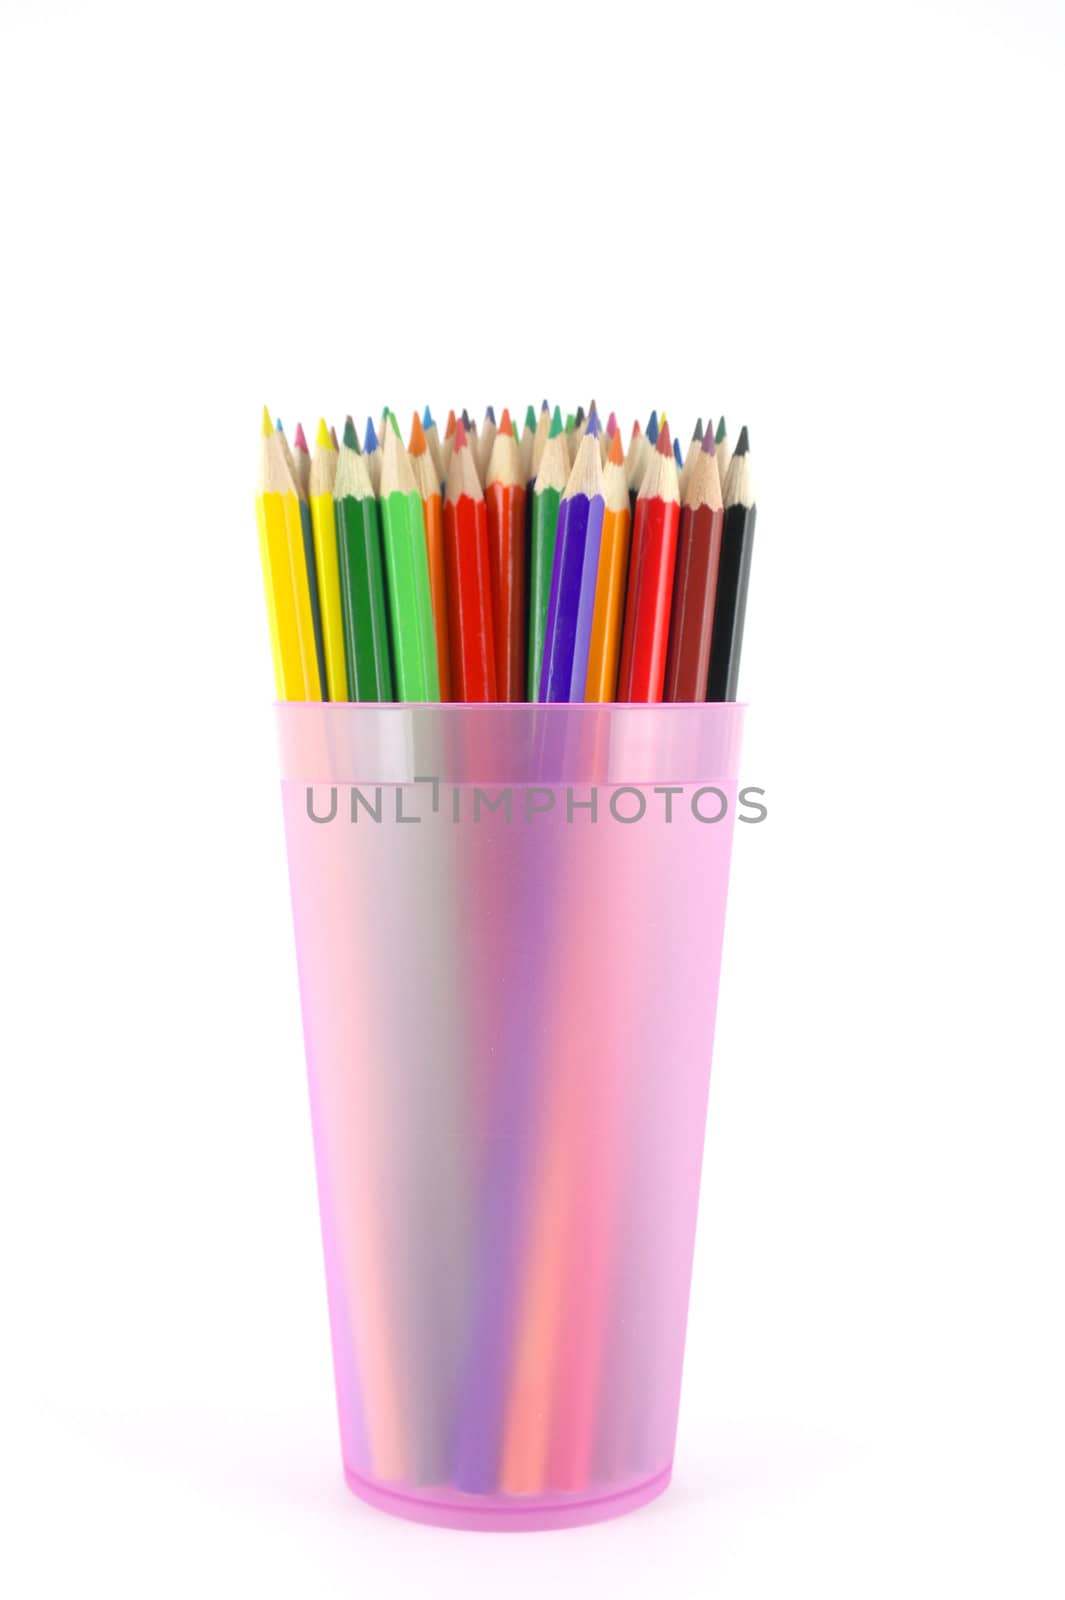 Color pencils in the pink prop over white